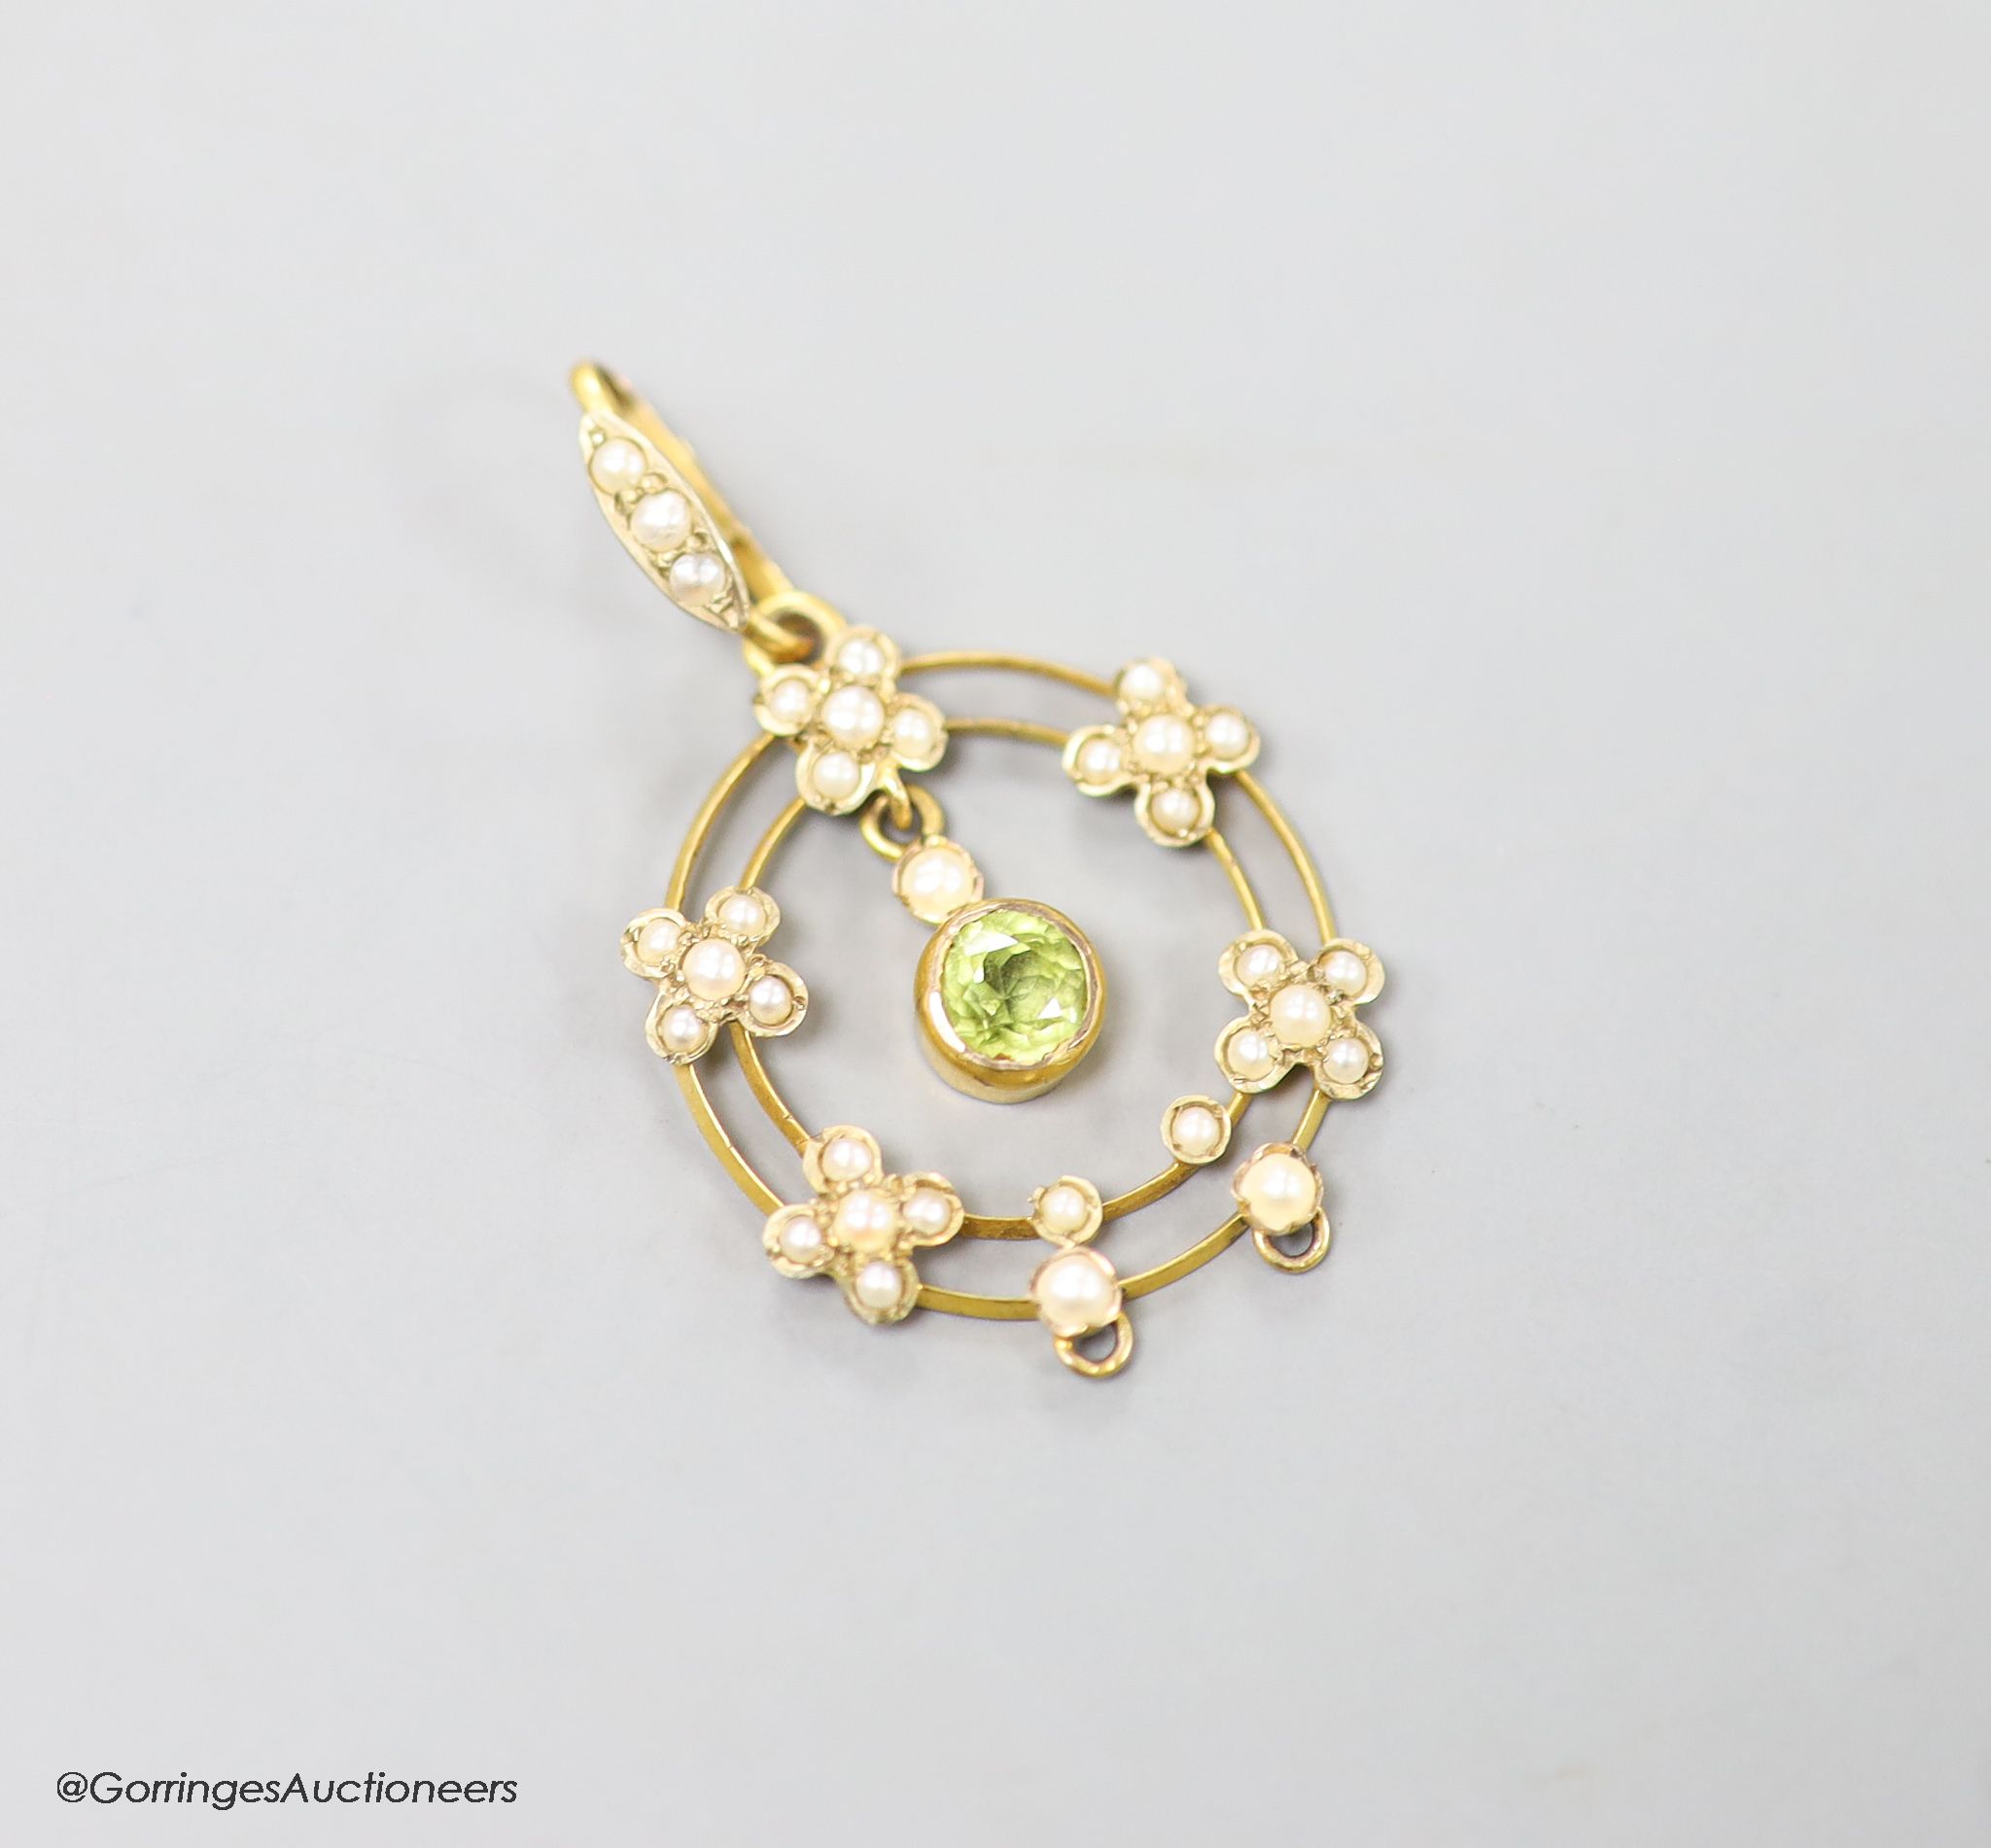 An early 20th century 9ct, peridot and seed pearl set drop pendant, overall 35mm, gross weight 2.1 grams.